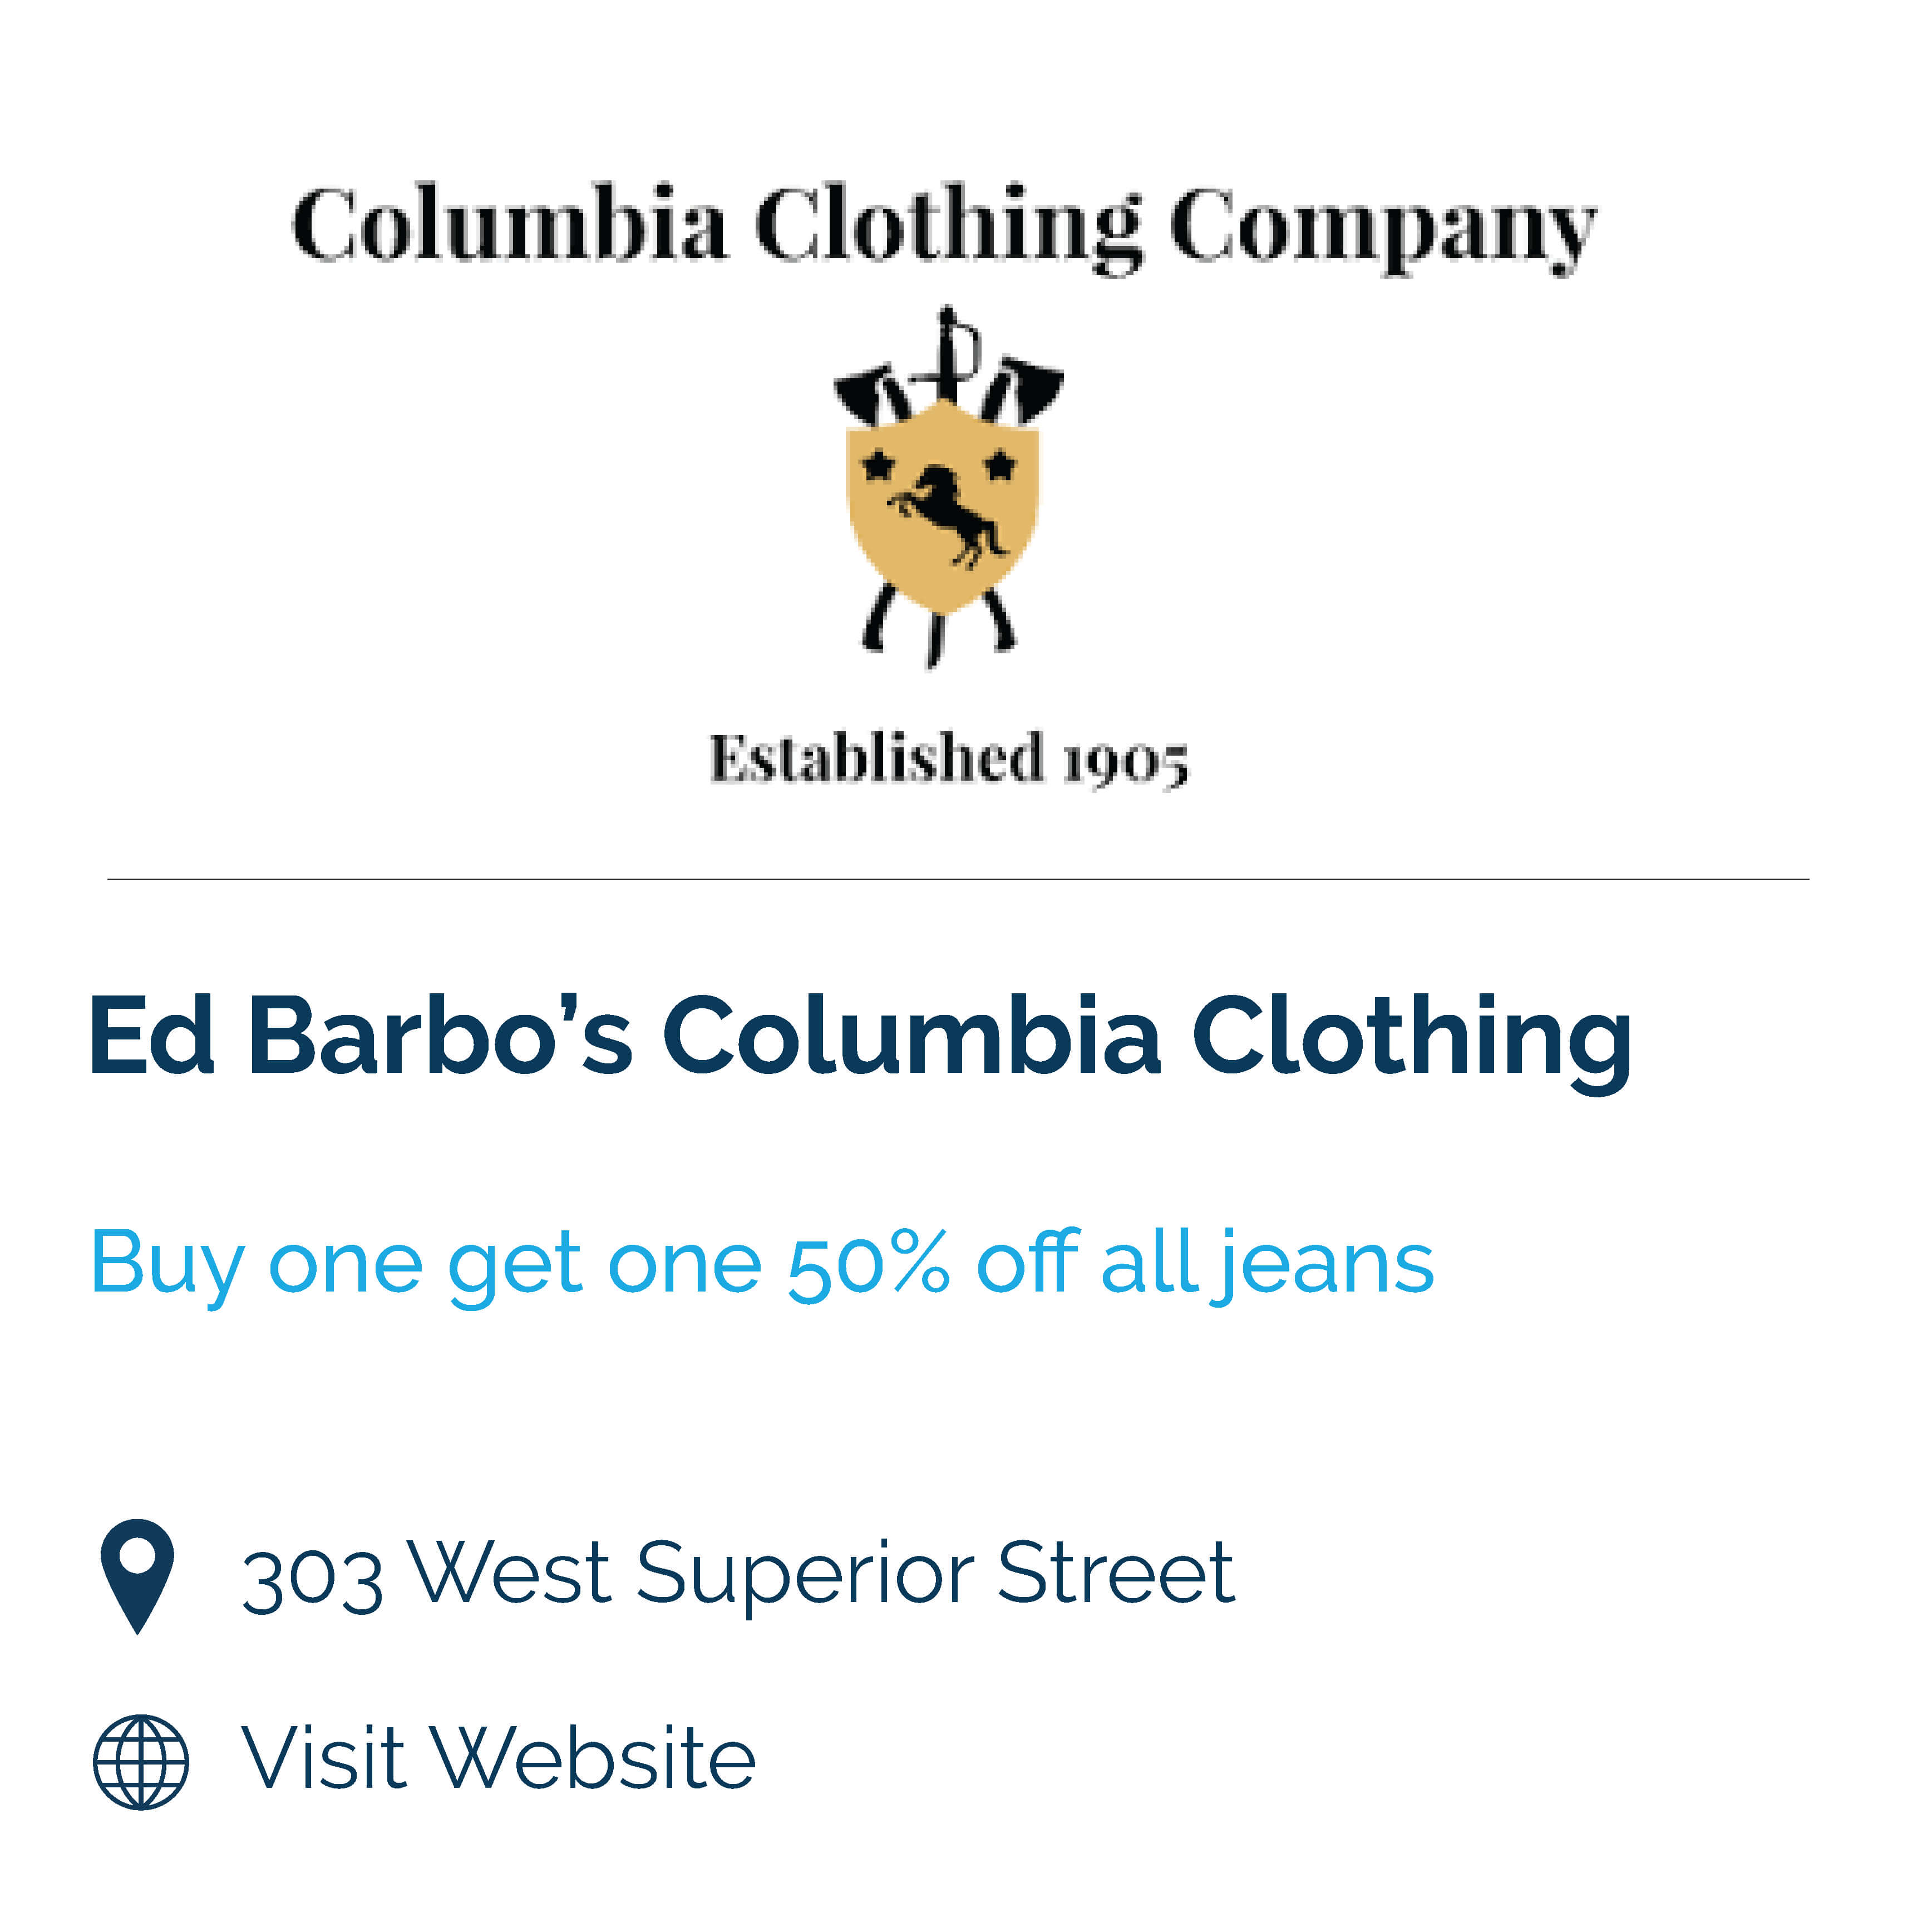 Ed Barbo's columbia clothing company. buy one get one 50% off all jeans. 303 west sueprior street